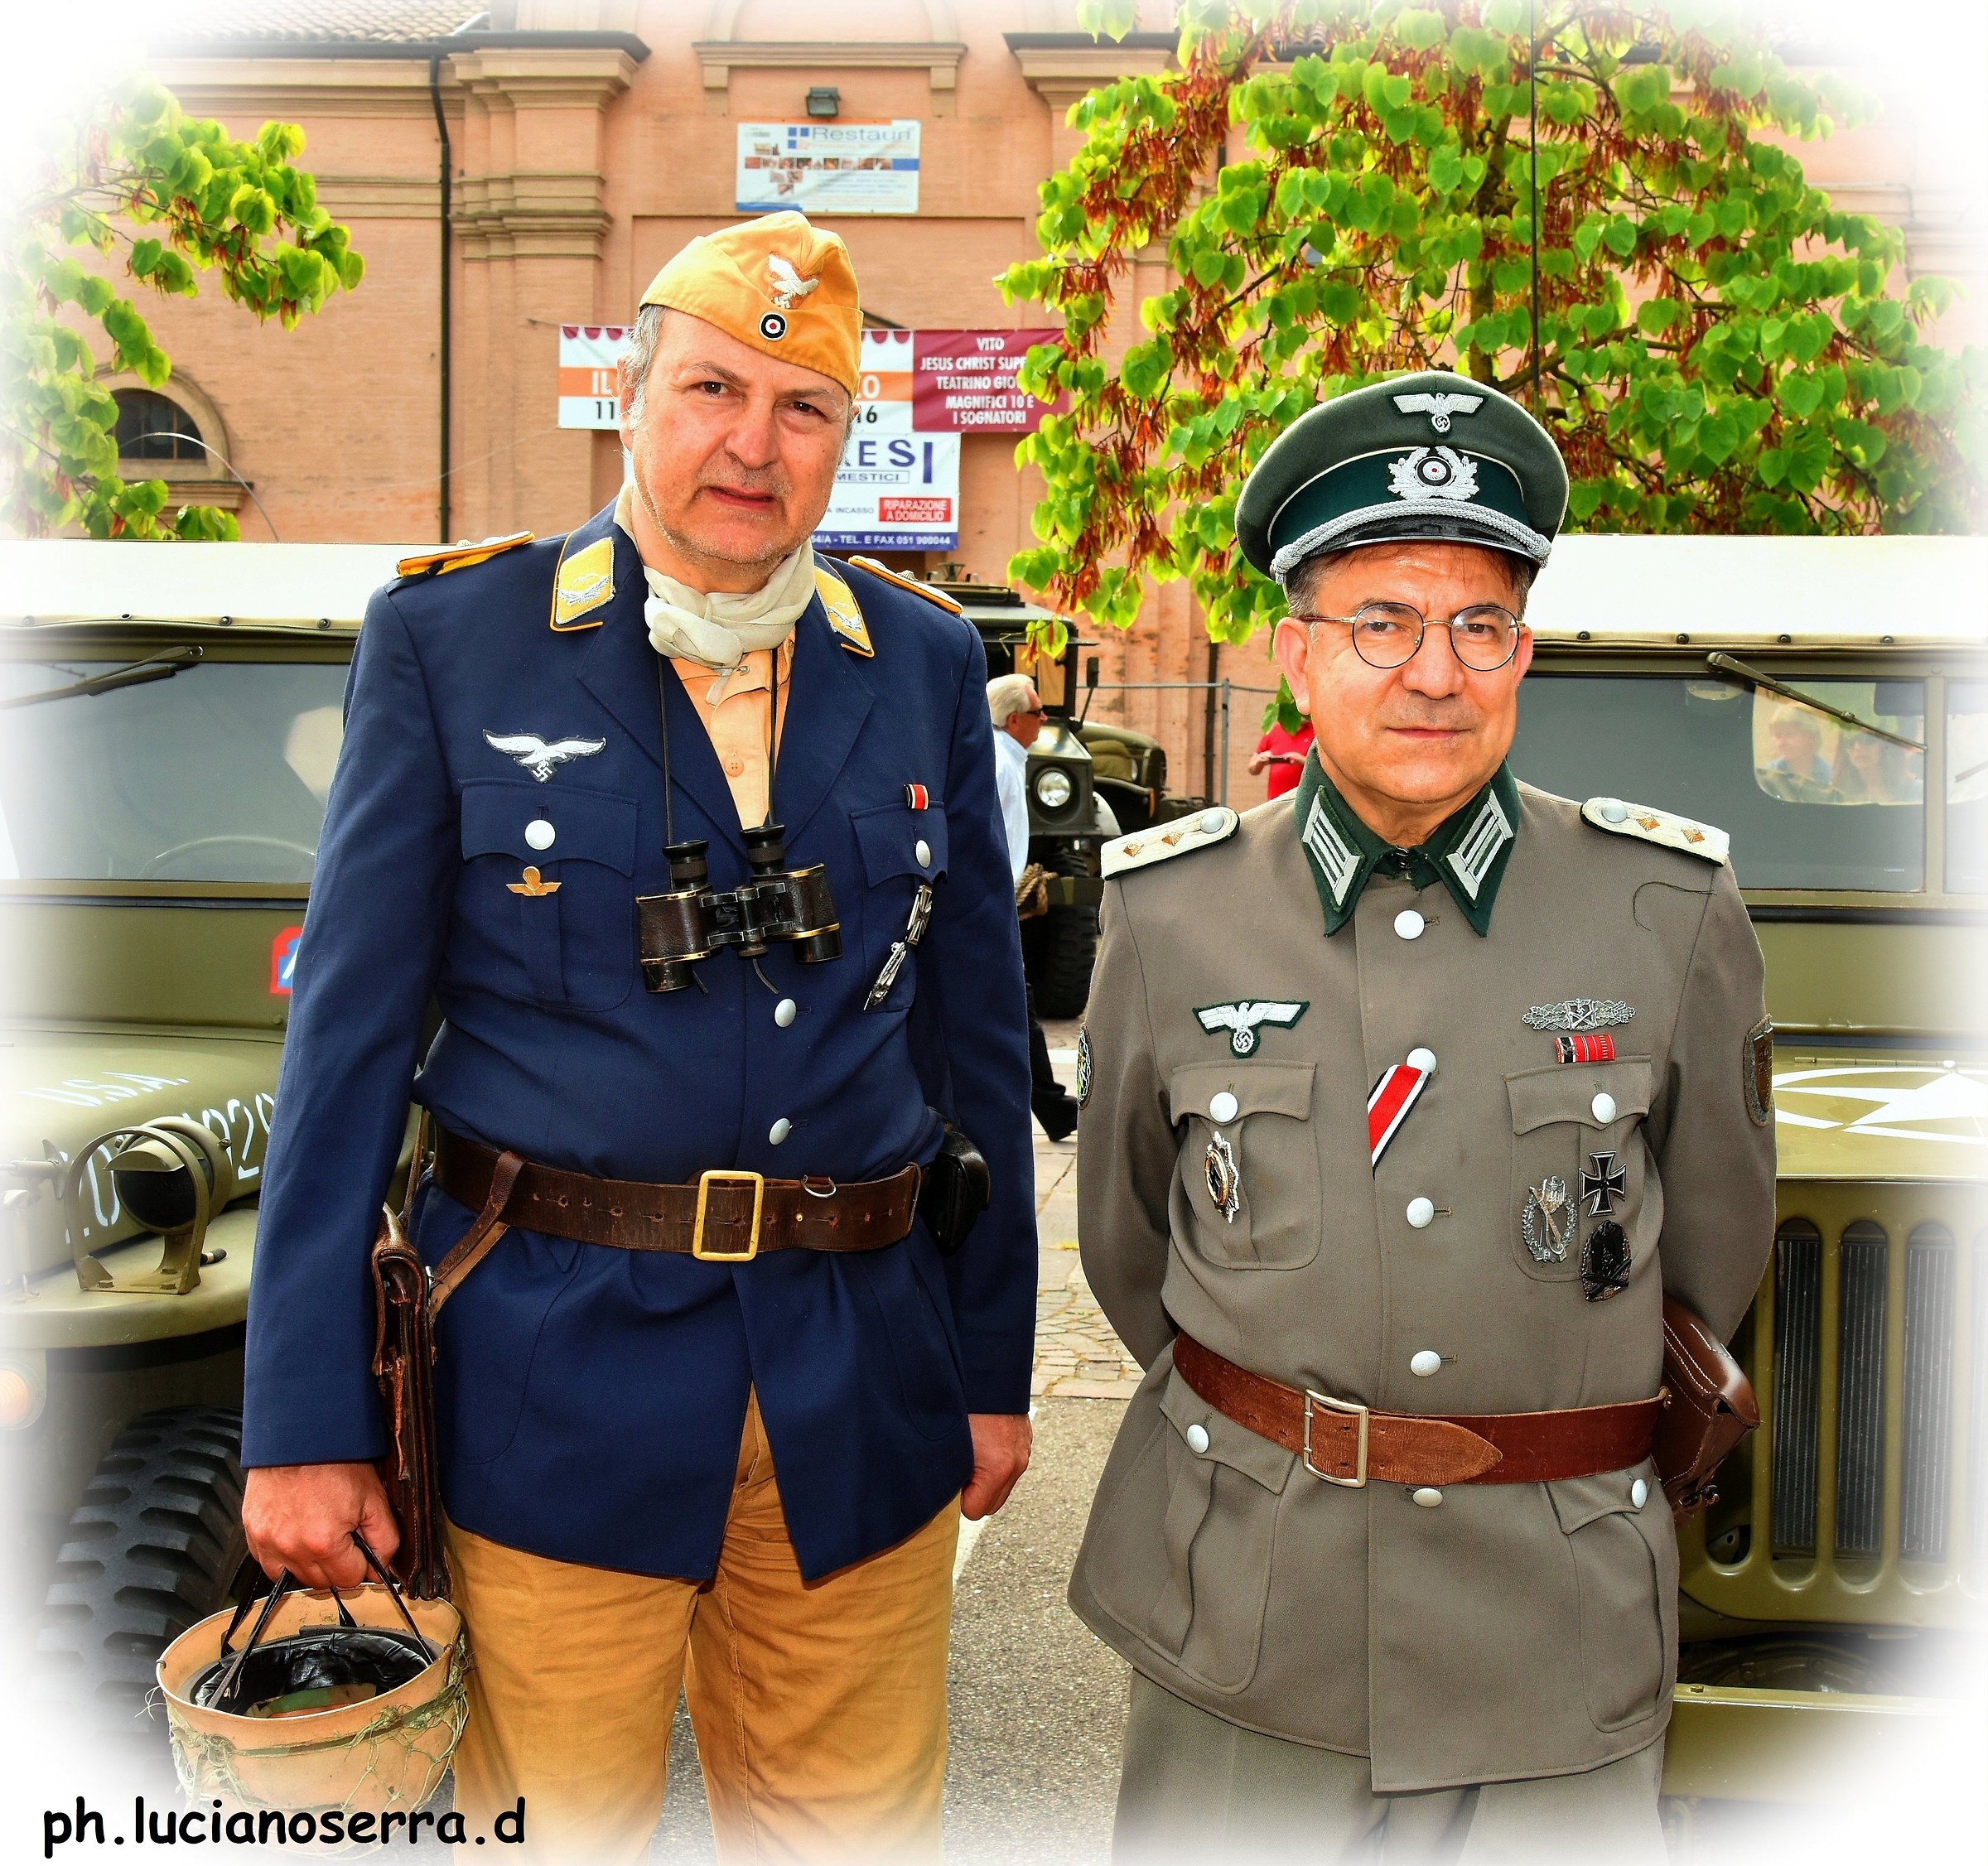 Contained with military uniforms of World War II...